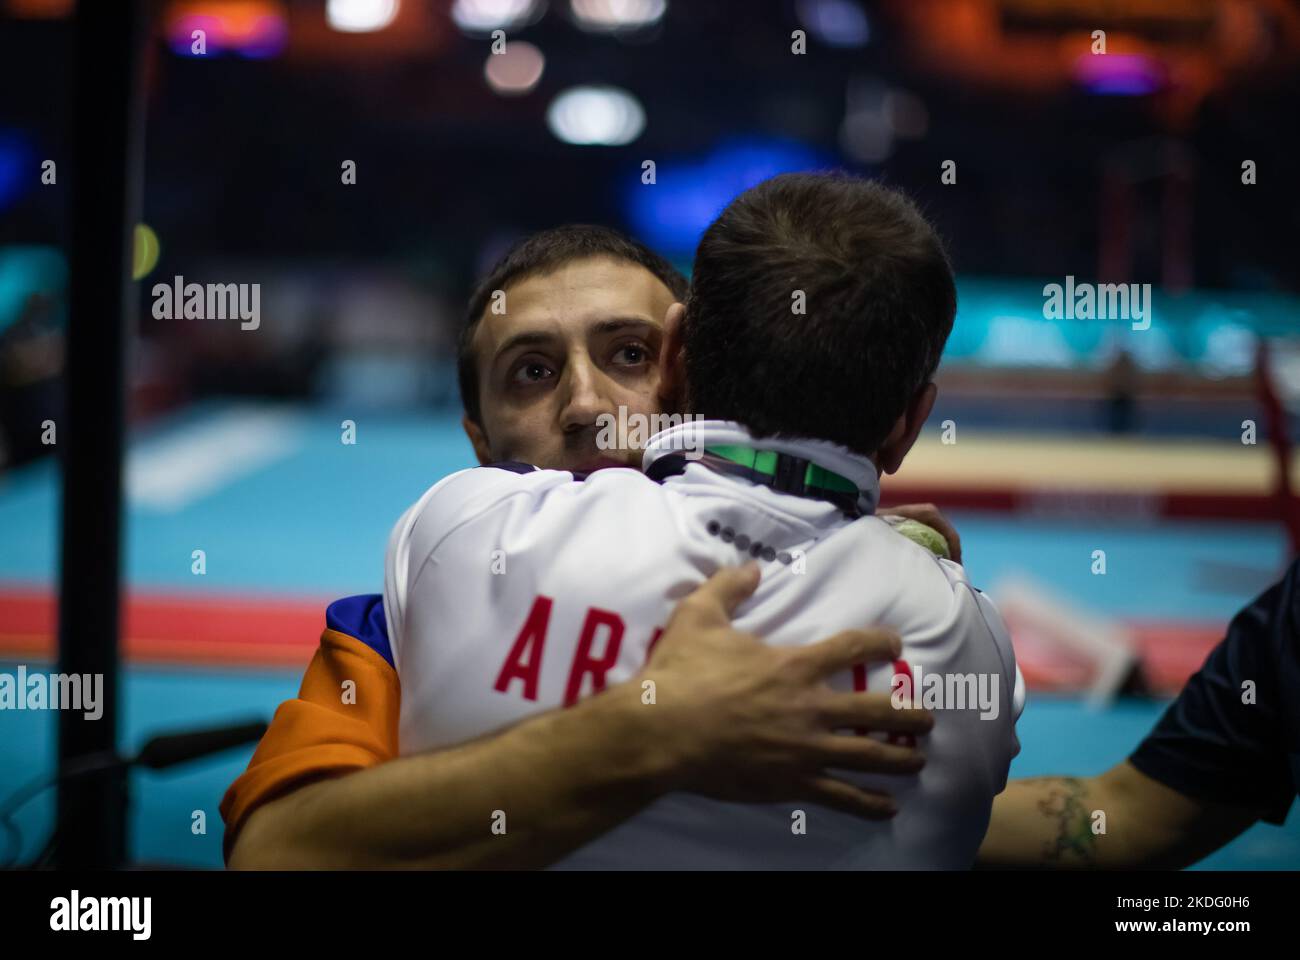 Liverpool, UK. 06th Nov, 2022. Liverpool, England, November 6th 2022 Artur Davtyan (ARM) celebrates their 1st Place in Vault at the Apparatus Finals at the FIG World Gymnastics Championships at the M&S Bank Arena in Liverpool, England Dan O' Connor (Dan O' Connor/SPP) Credit: SPP Sport Press Photo. /Alamy Live News Stock Photo